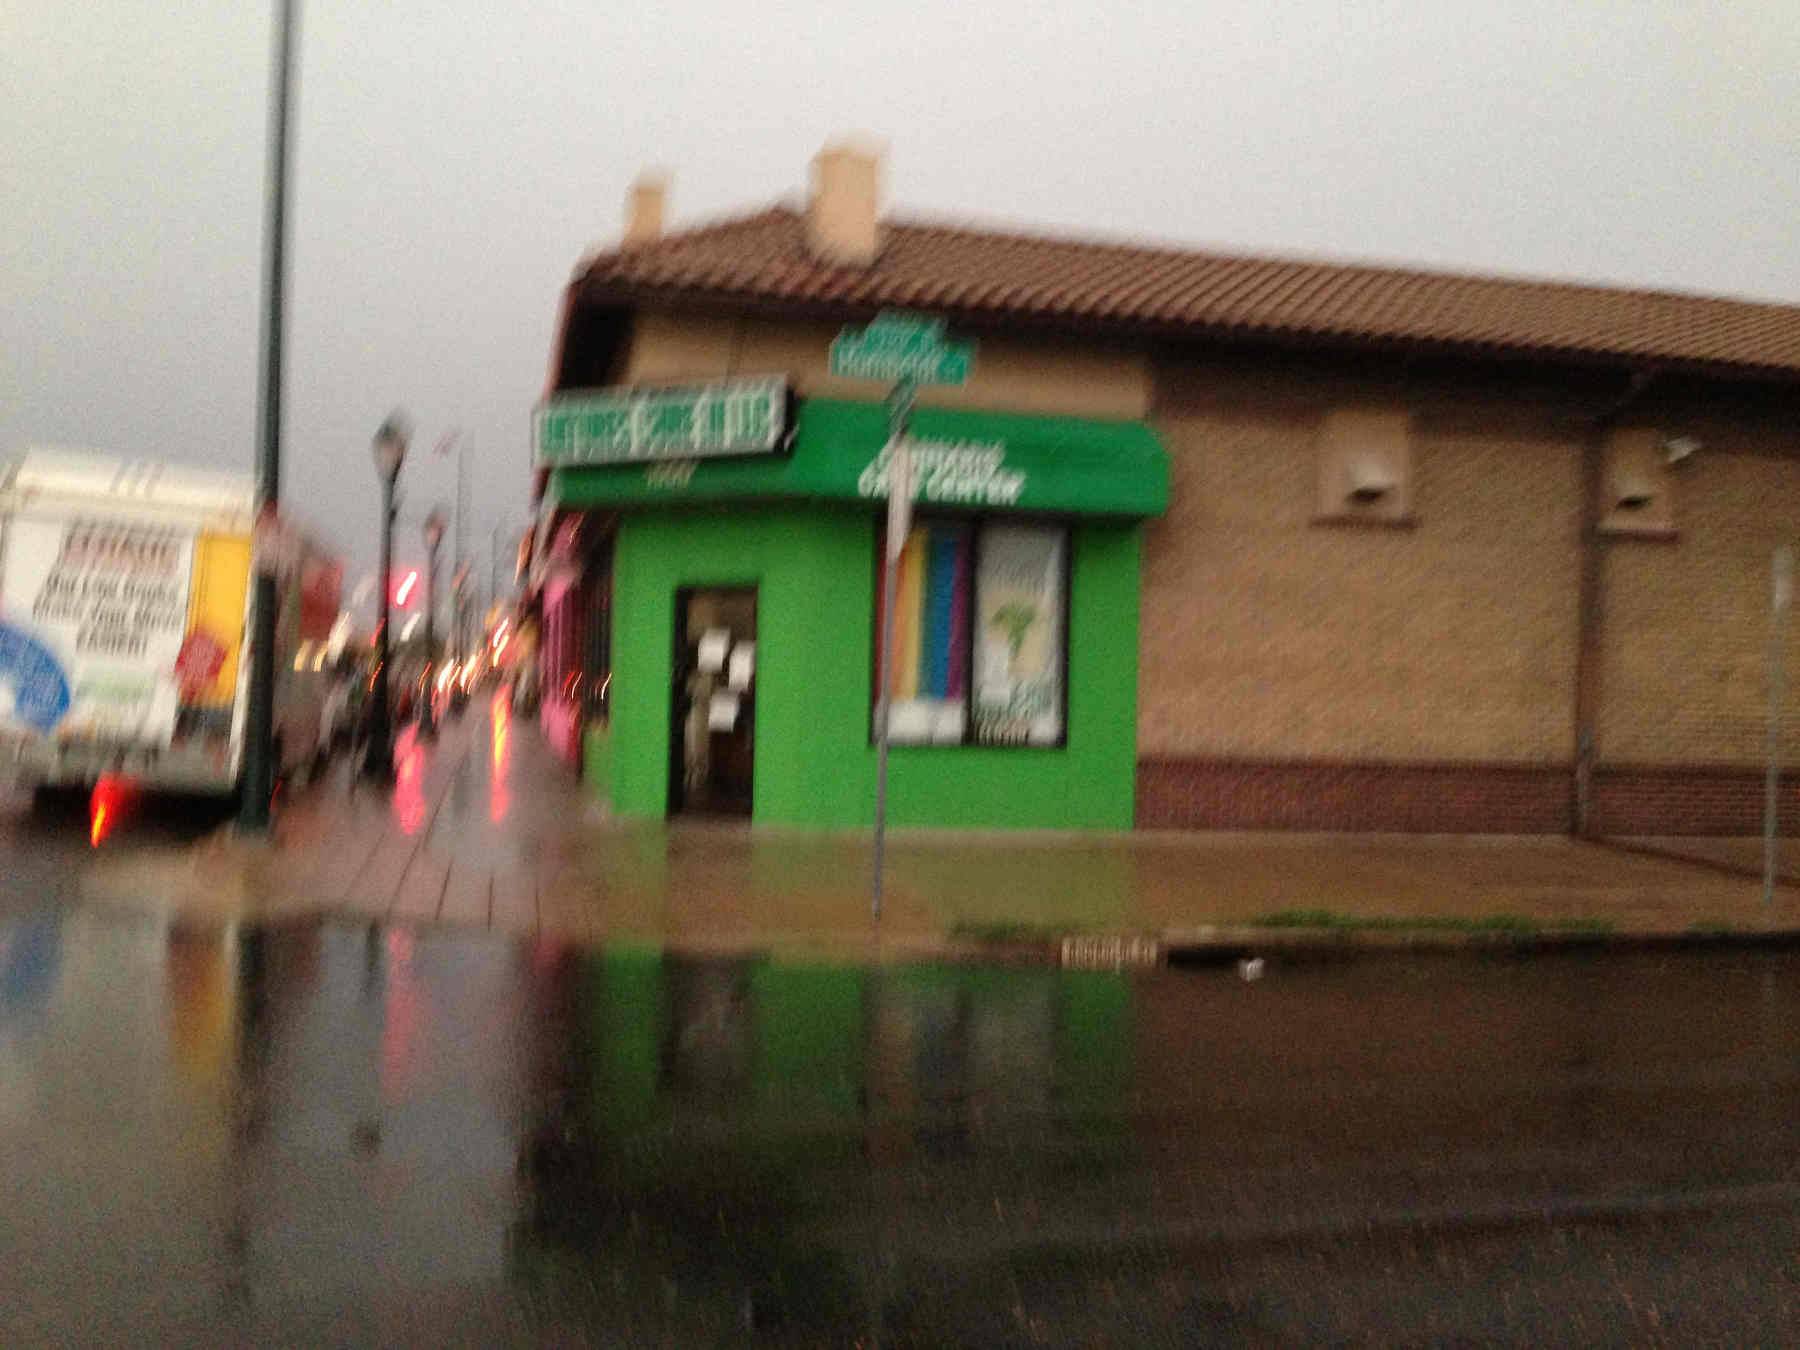 A bright coloured weed dispensary, barely legible through this blurry photo